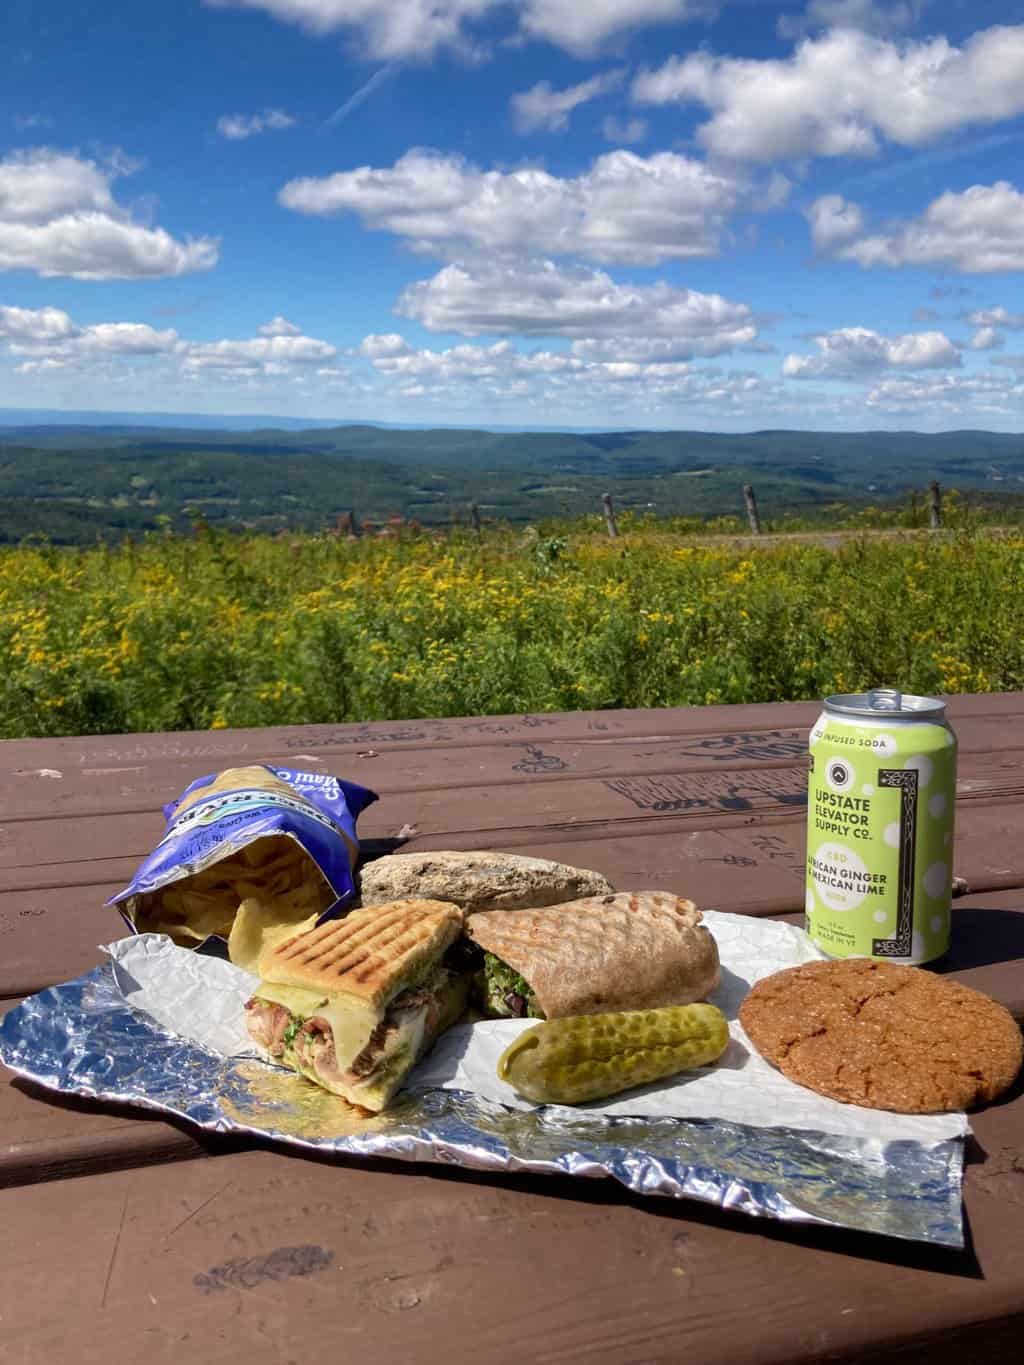 Picnic views of the mountains in the Berkshires of Massachusetts.